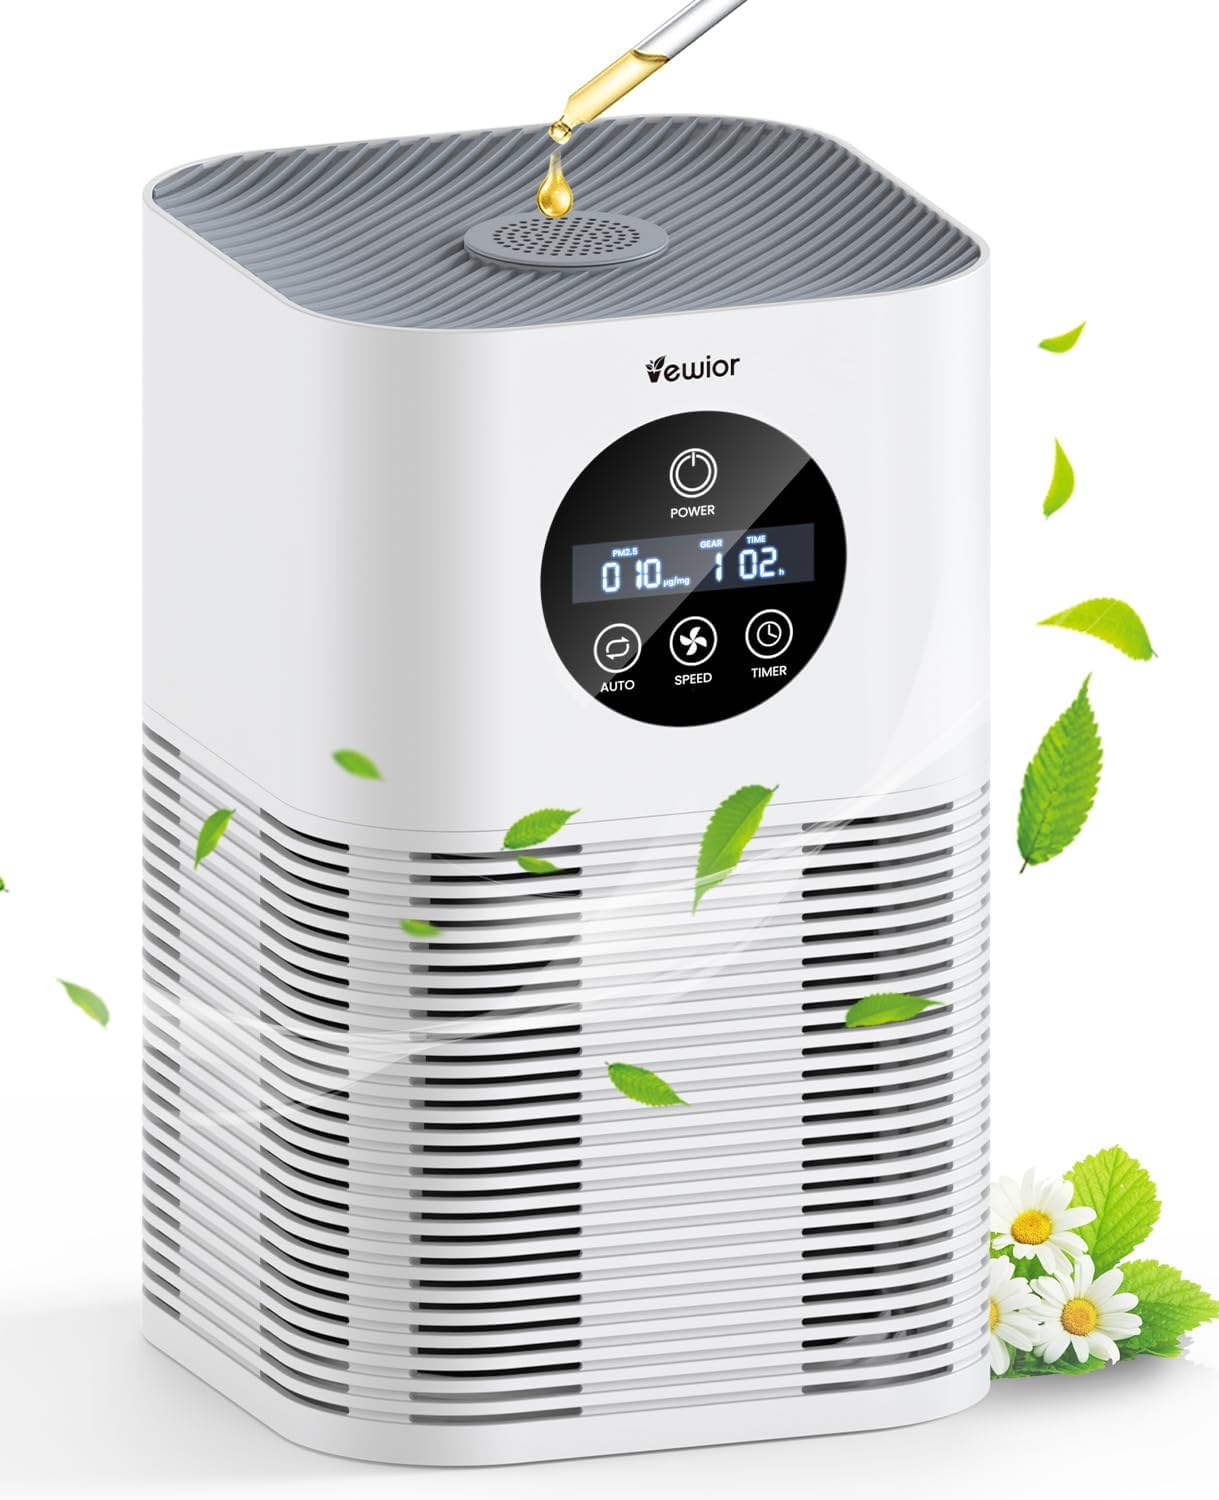 VEWIOR Air Purifiers, Fragrance Sponge PM2.5 Monitor H13 True HEPA Air Filter, 387 CFM Pets Air Cleaner for Home Bedroom Large Room Vewior